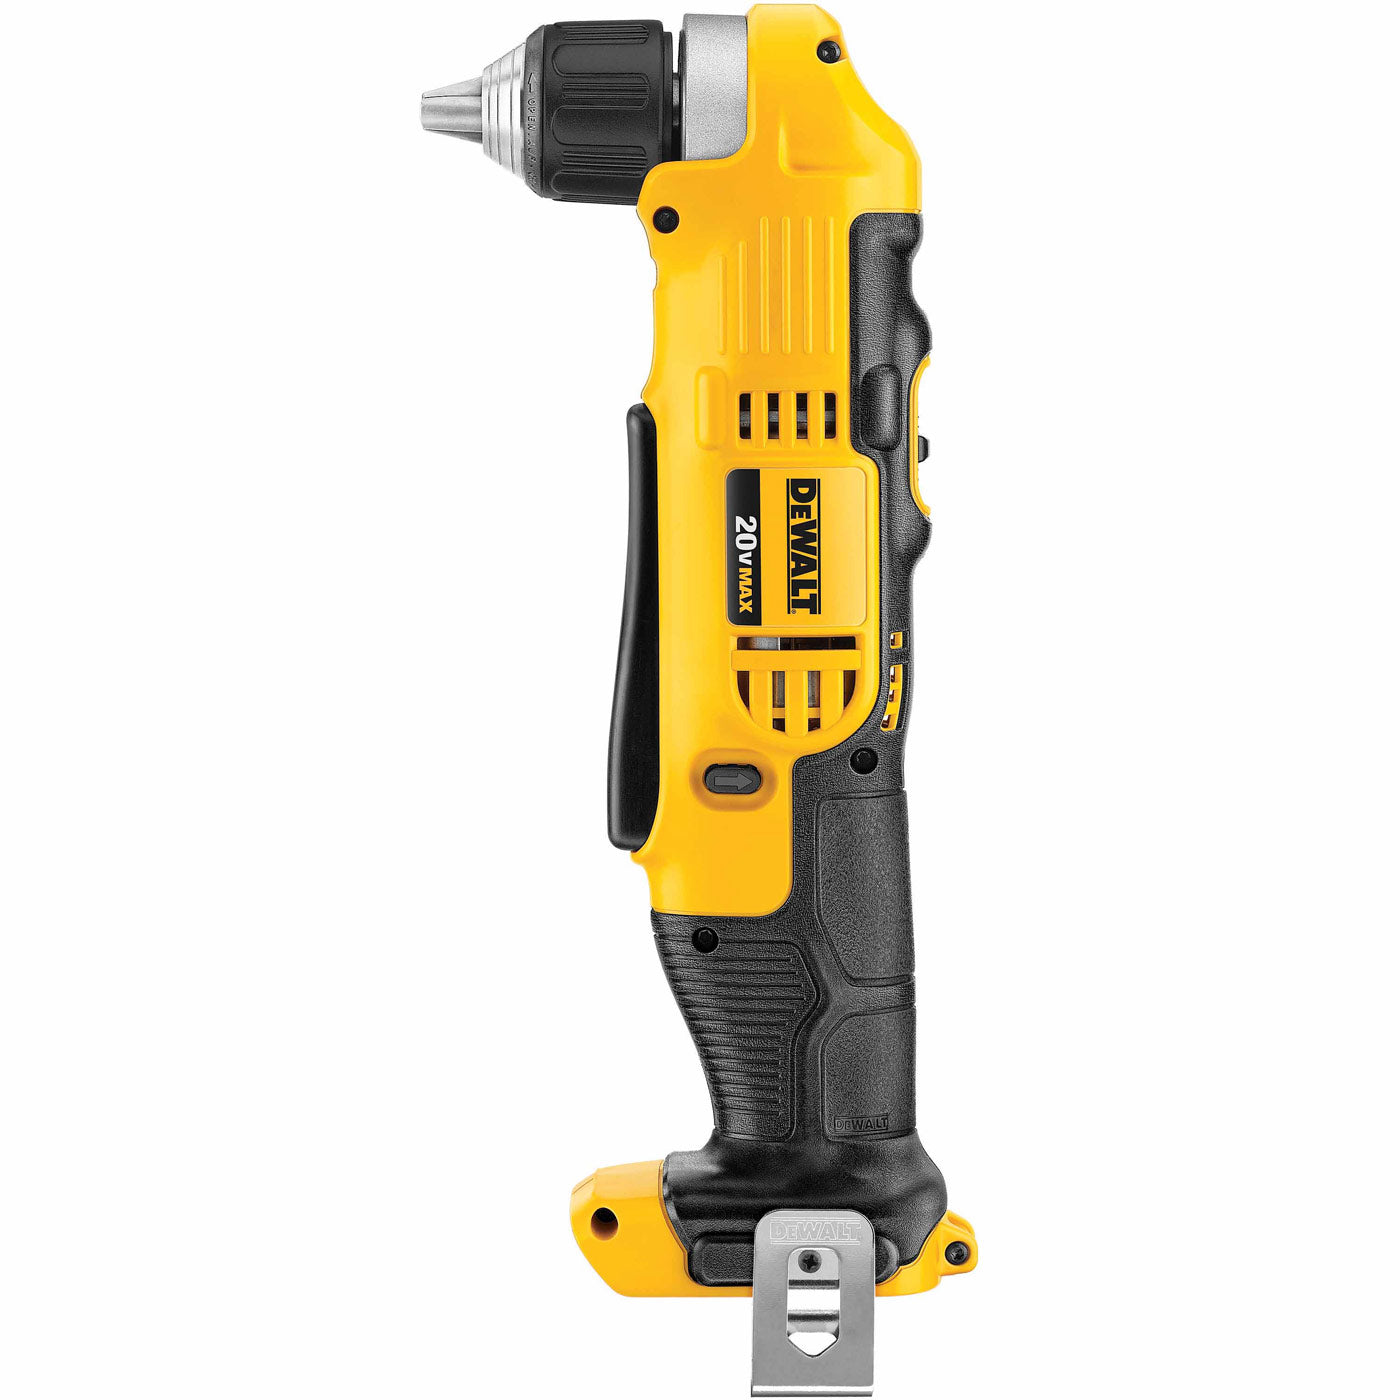 DeWalt DCD740B 20V MAX Lithium Ion 3/8" Right Angle Drill/Driver, Tool Only